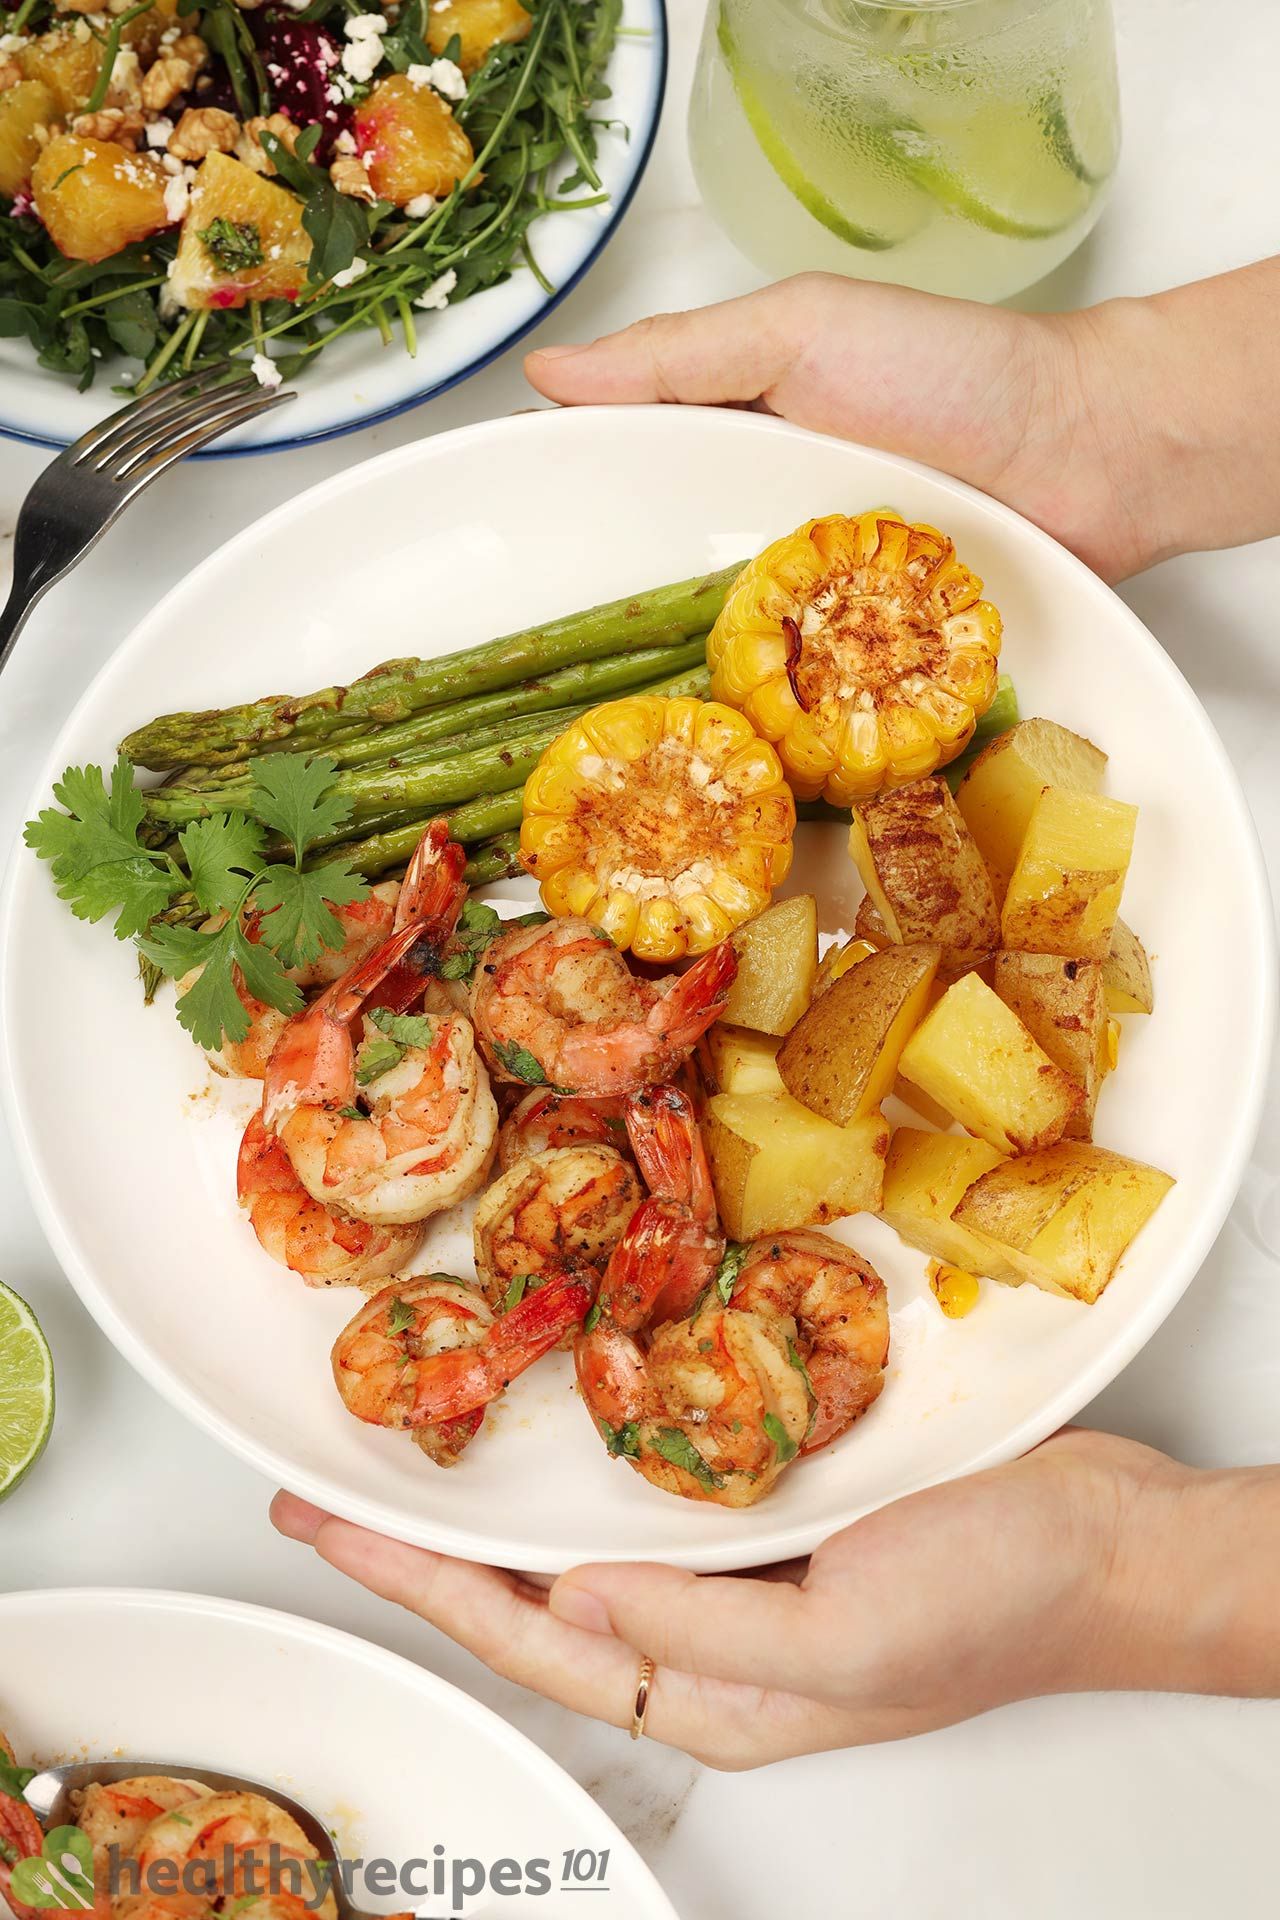 What to Serve With Tequila Lime Shrimp